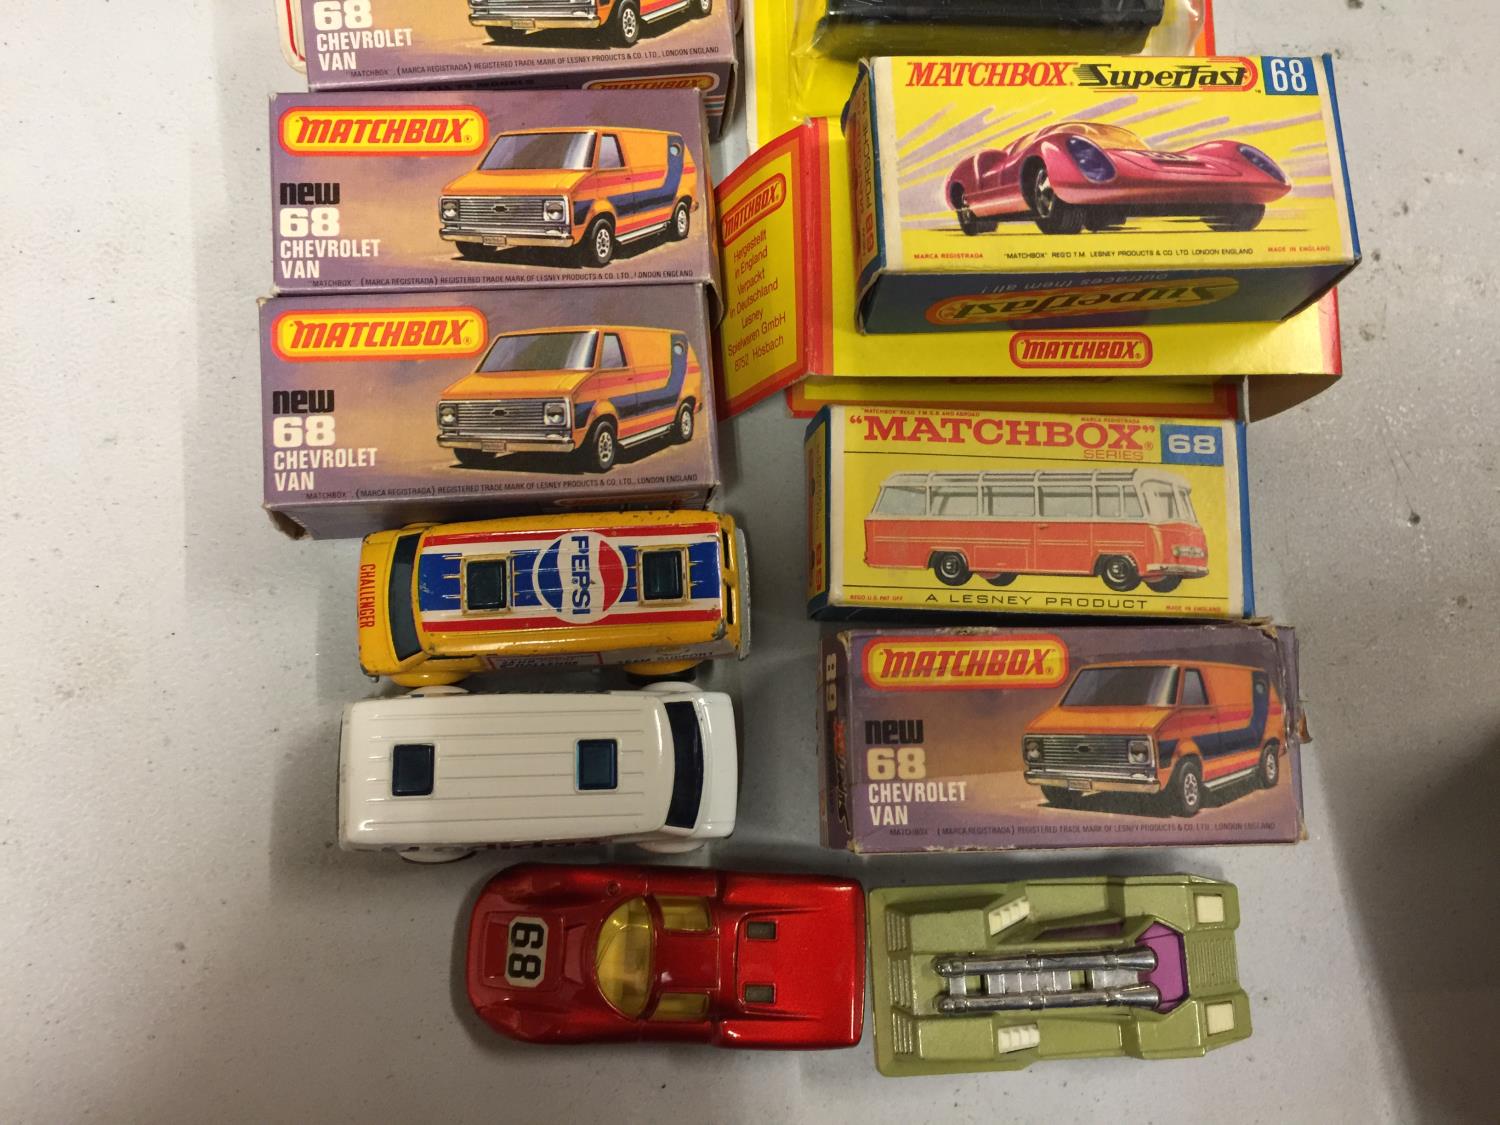 A COLLECTION OF BOXED AND UNBOXED MATCHBOX VEHICLES - ALL MODEL NUMBER 68 OF VARIOUS ERAS AND - Image 3 of 3